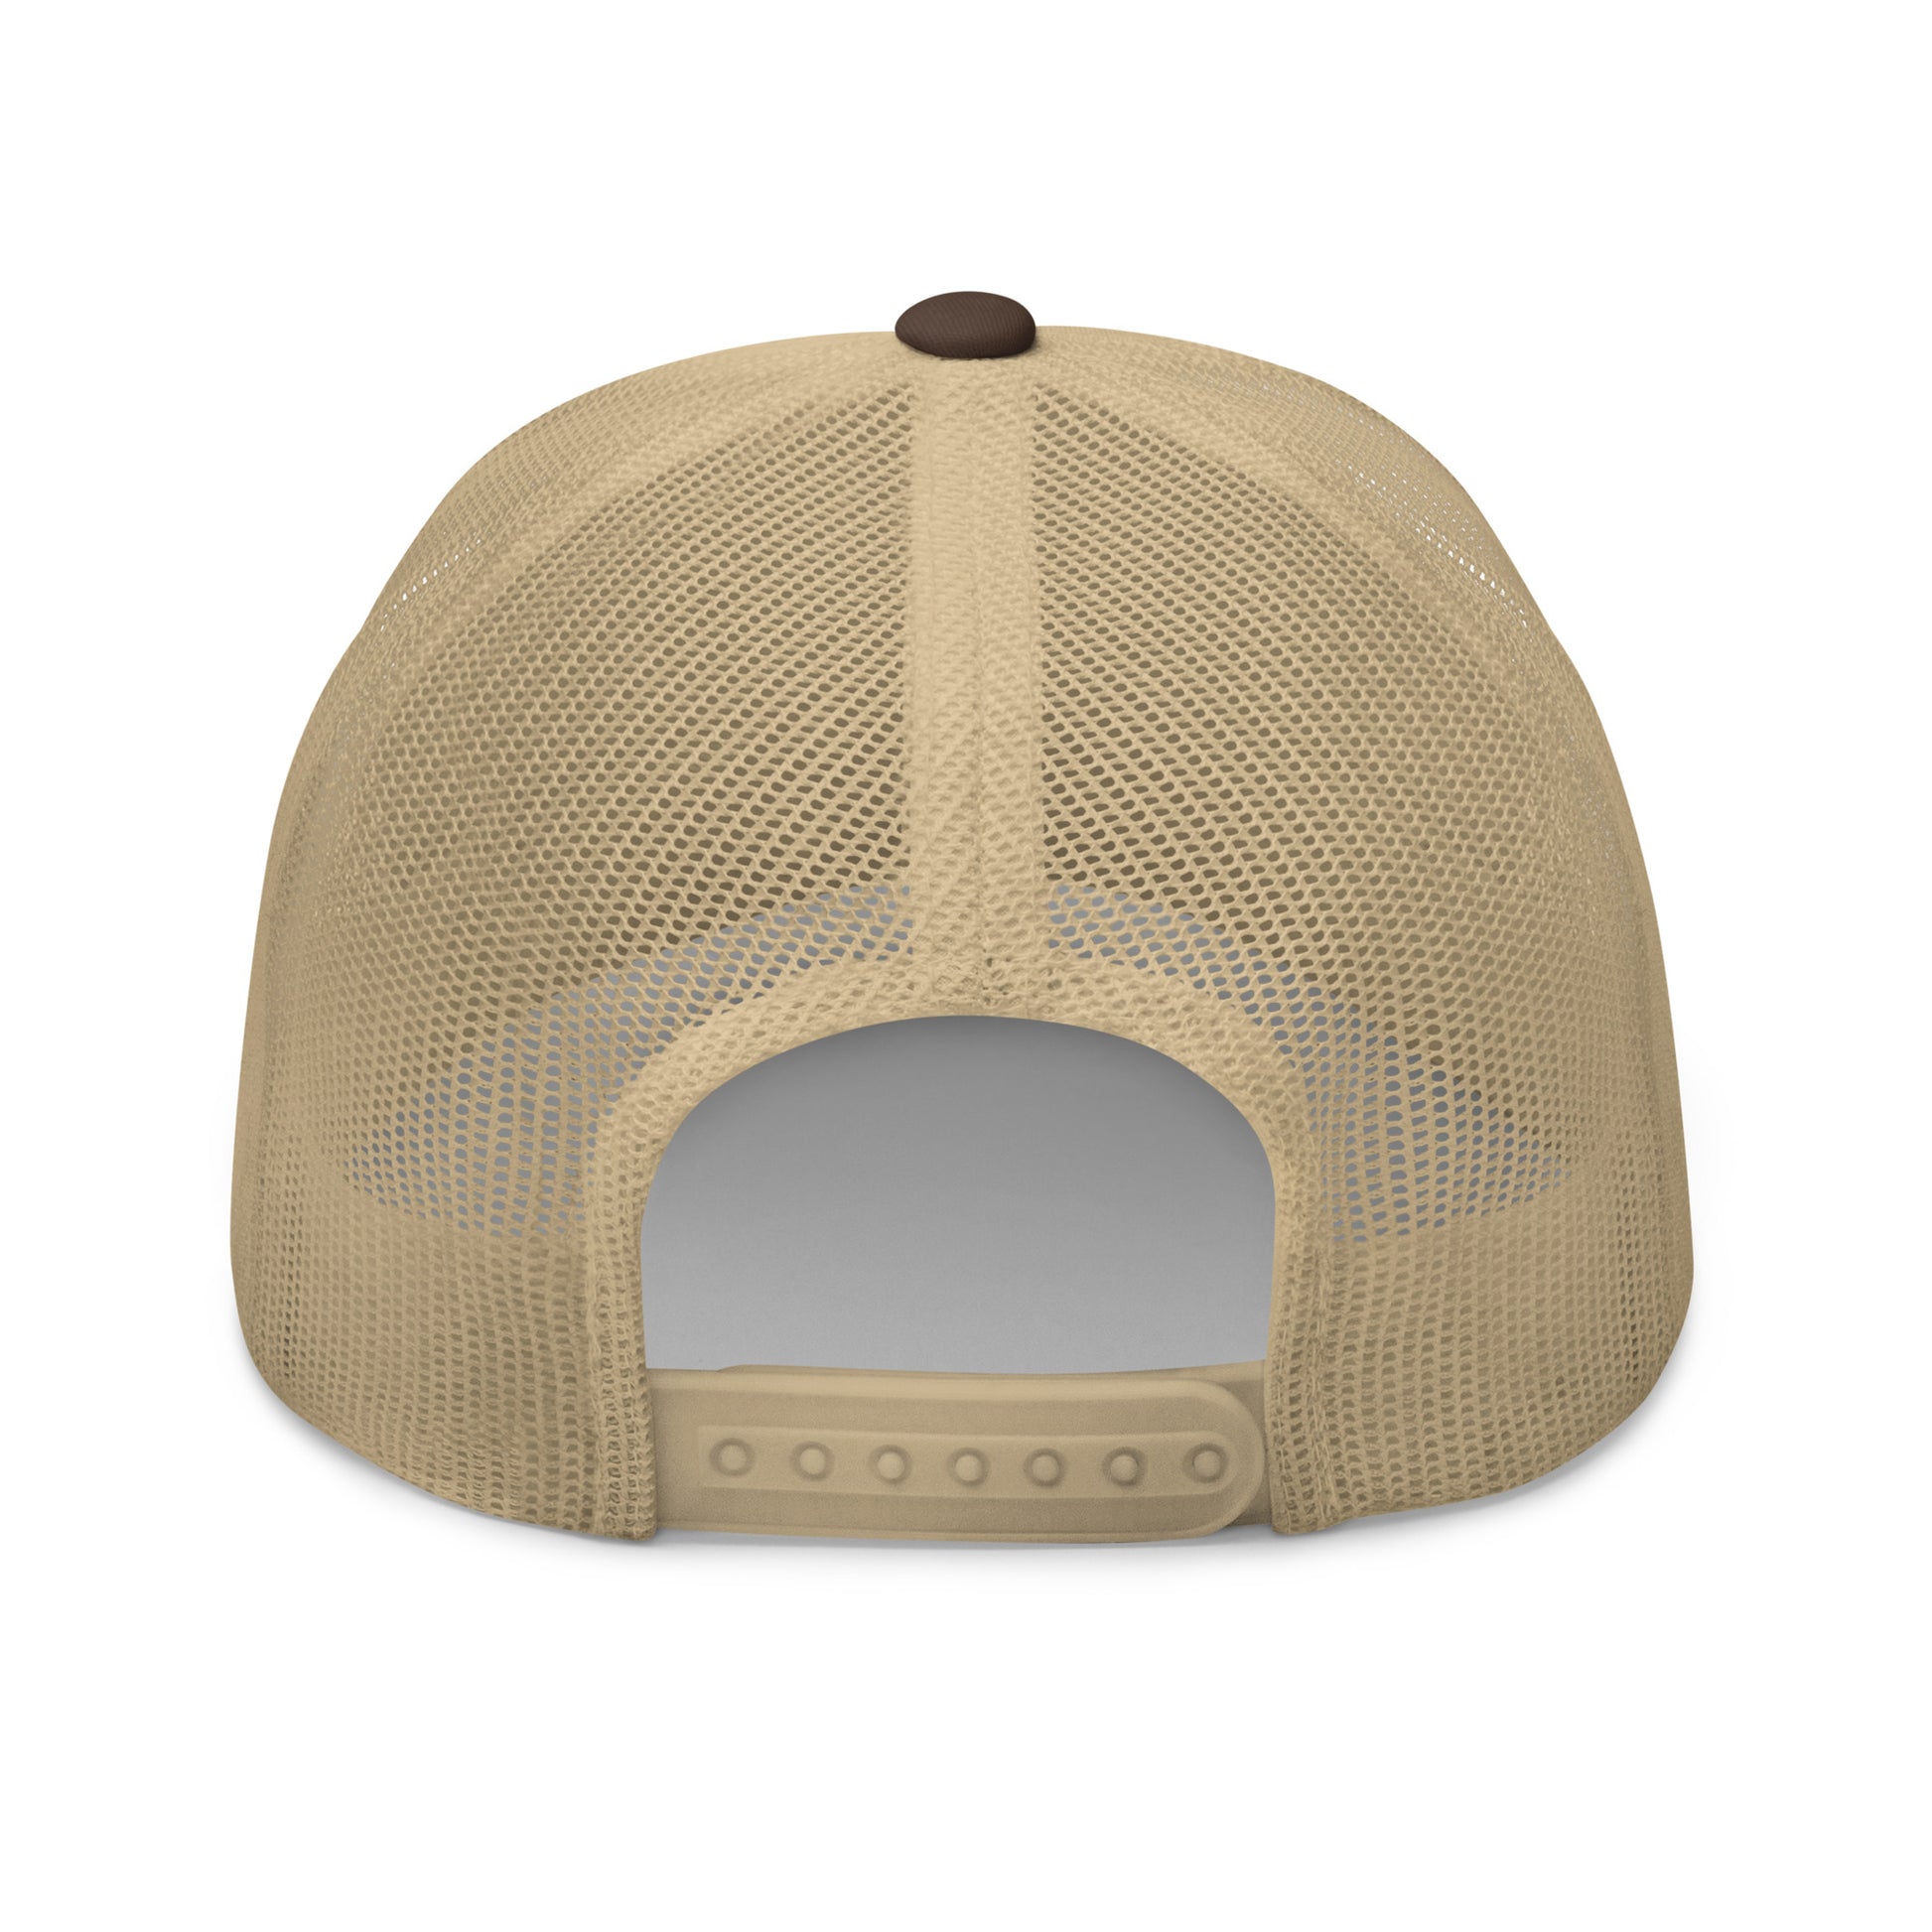 Wildfire Cigars embroidered Camp Counselor retro trucker in brown and khaki facing the back